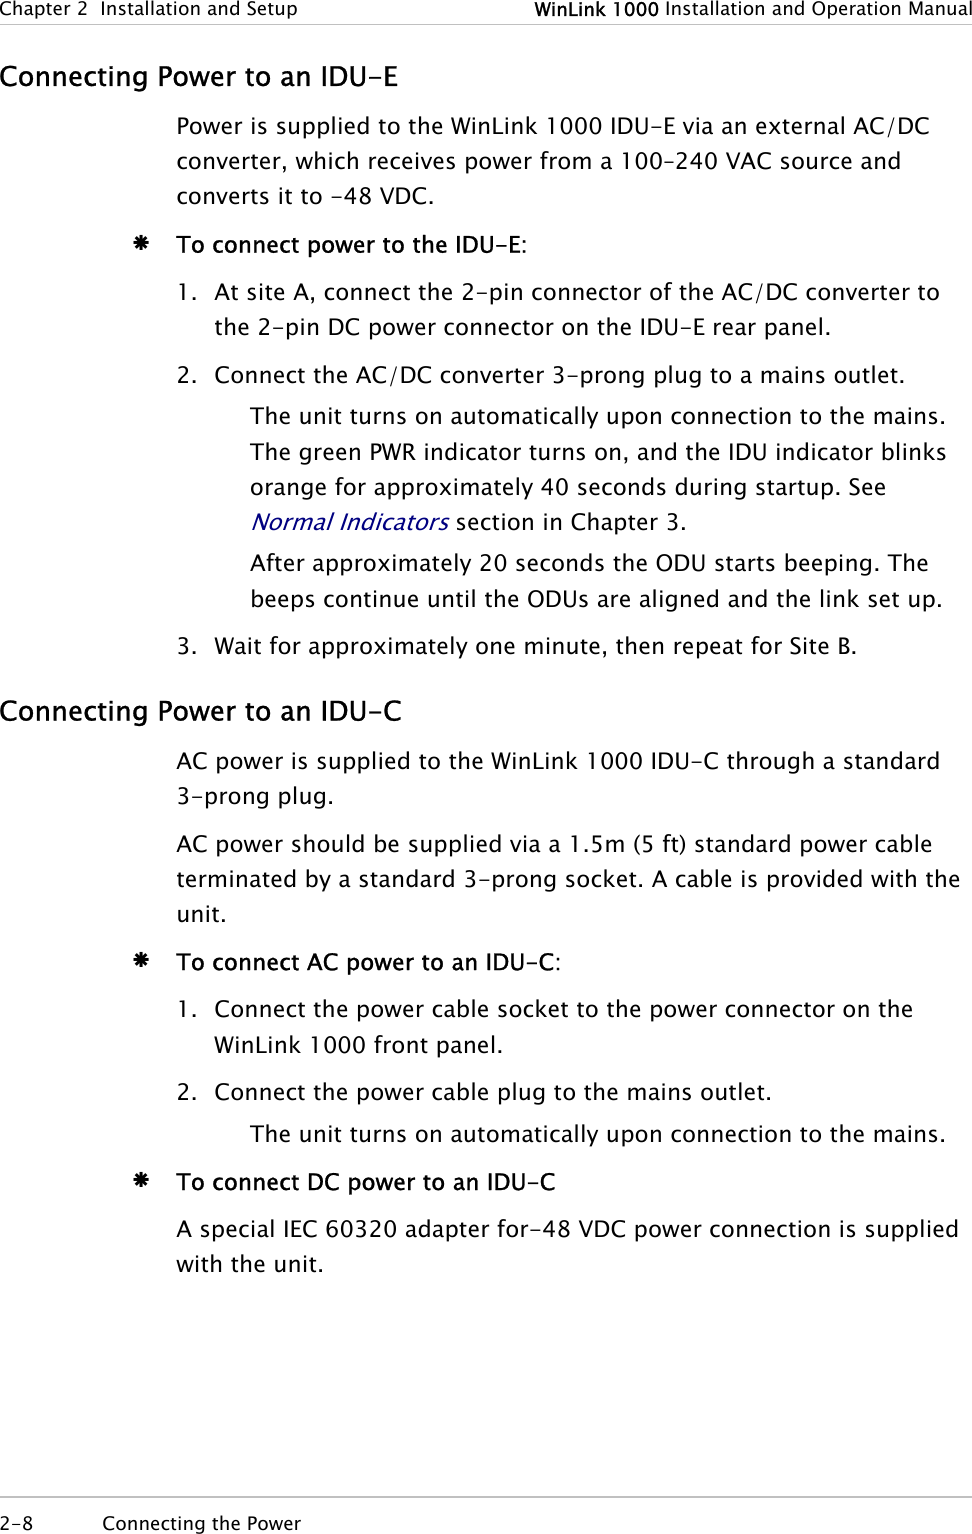 Chapter  2  Installation and Setup  WinLink 1000 Installation and Operation Manual Connecting Power to an IDU-E Power is supplied to the WinLink 1000 IDU-E via an external AC/DC converter, which receives power from a 100–240 VAC source and converts it to -48 VDC. Æ To connect power to the IDU-E: 1. At site A, connect the 2-pin connector of the AC/DC converter to the 2-pin DC power connector on the IDU-E rear panel.  2. Connect the AC/DC converter 3-prong plug to a mains outlet. The unit turns on automatically upon connection to the mains. The green PWR indicator turns on, and the IDU indicator blinks orange for approximately 40 seconds during startup. See Normal Indicators section in Chapter 3. After approximately 20 seconds the ODU starts beeping. The beeps continue until the ODUs are aligned and the link set up. 3. Wait for approximately one minute, then repeat for Site B. Connecting Power to an IDU-C AC power is supplied to the WinLink 1000 IDU-C through a standard 3-prong plug. AC power should be supplied via a 1.5m (5 ft) standard power cable terminated by a standard 3-prong socket. A cable is provided with the unit. Æ To connect AC power to an IDU-C: 1. Connect the power cable socket to the power connector on the WinLink 1000 front panel. 2. Connect the power cable plug to the mains outlet. The unit turns on automatically upon connection to the mains. Æ To connect DC power to an IDU-C A special IEC 60320 adapter for-48 VDC power connection is supplied with the unit.  2-8  Connecting the Power   